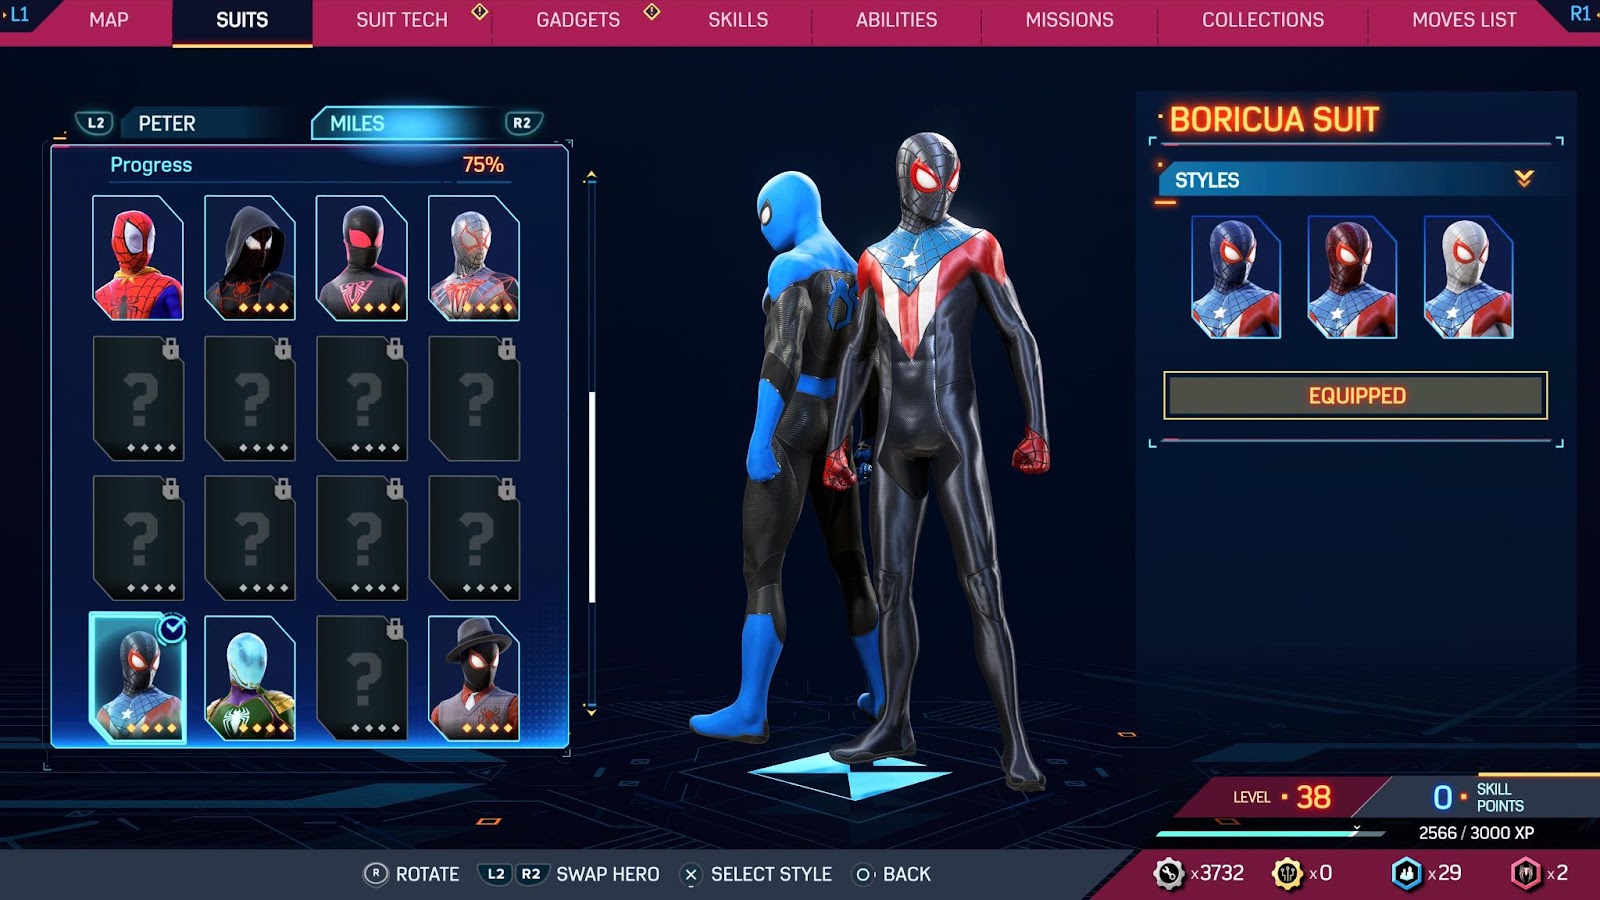 An in game screenshot of Miles Morales in the Boricua suit from the suit menu in Marvel's Spider-Man 2